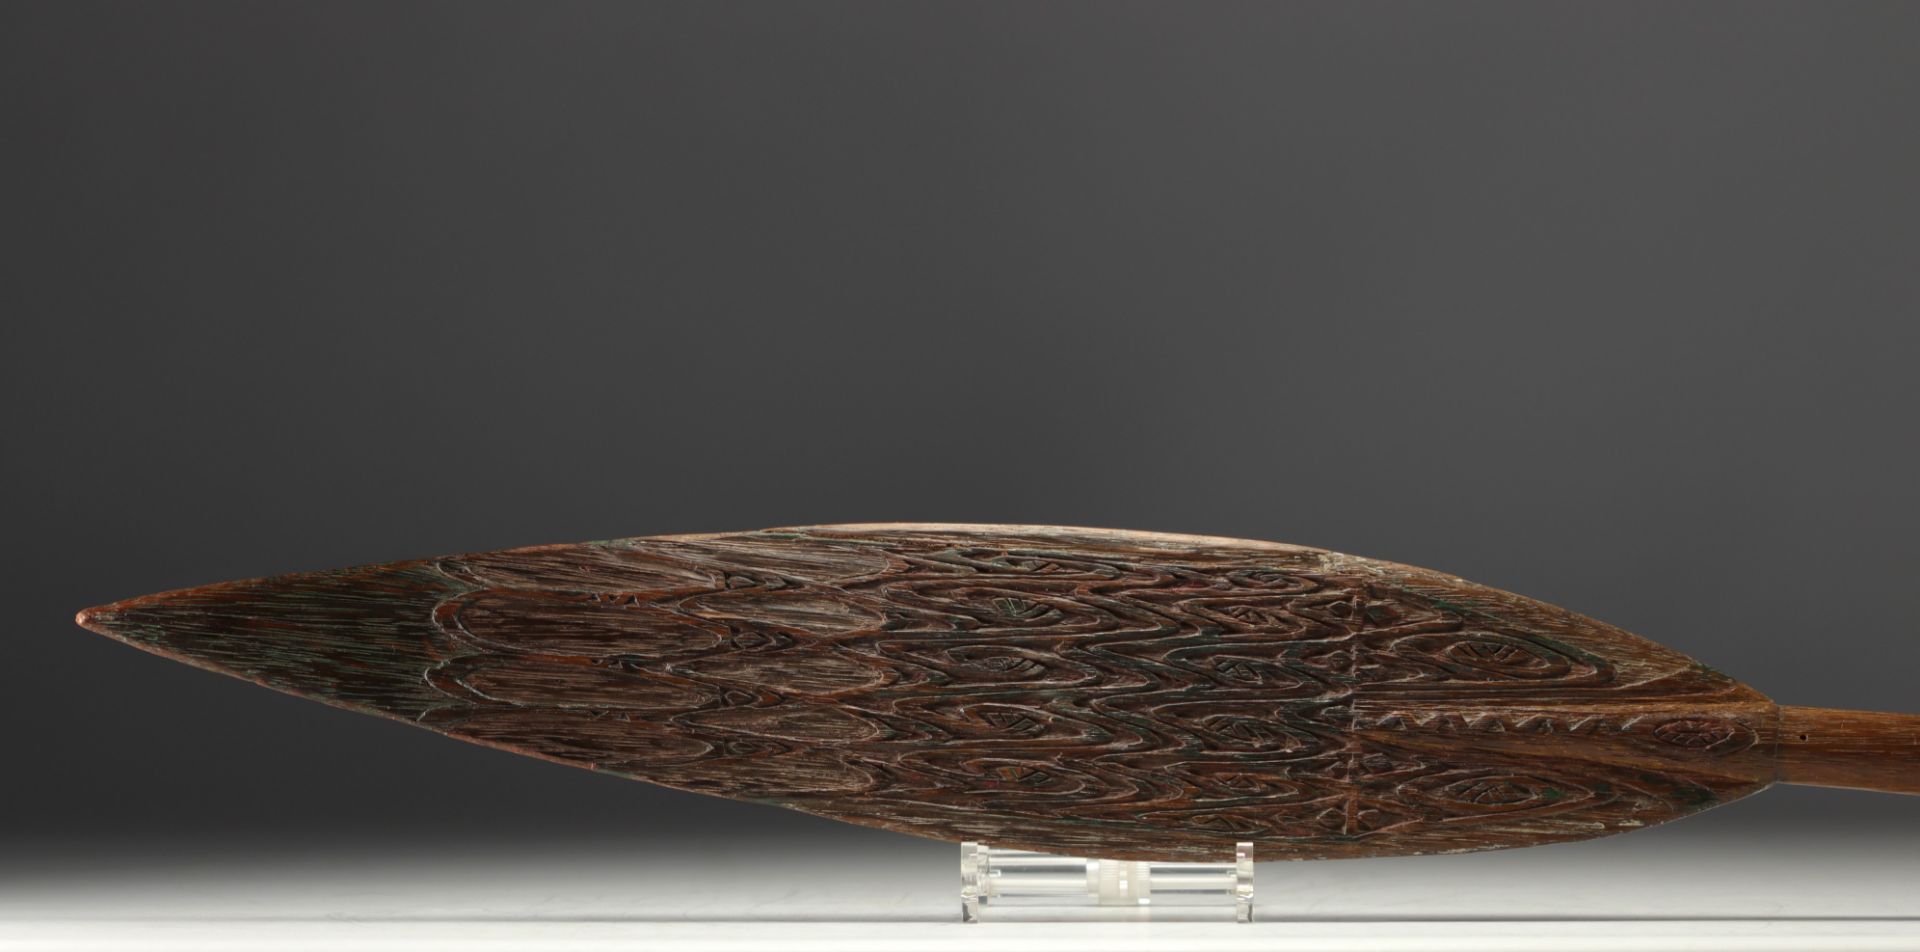 New Guinea, Sepik, Ceremonial paddle in carved wood with traces of polychromy. - Image 3 of 3